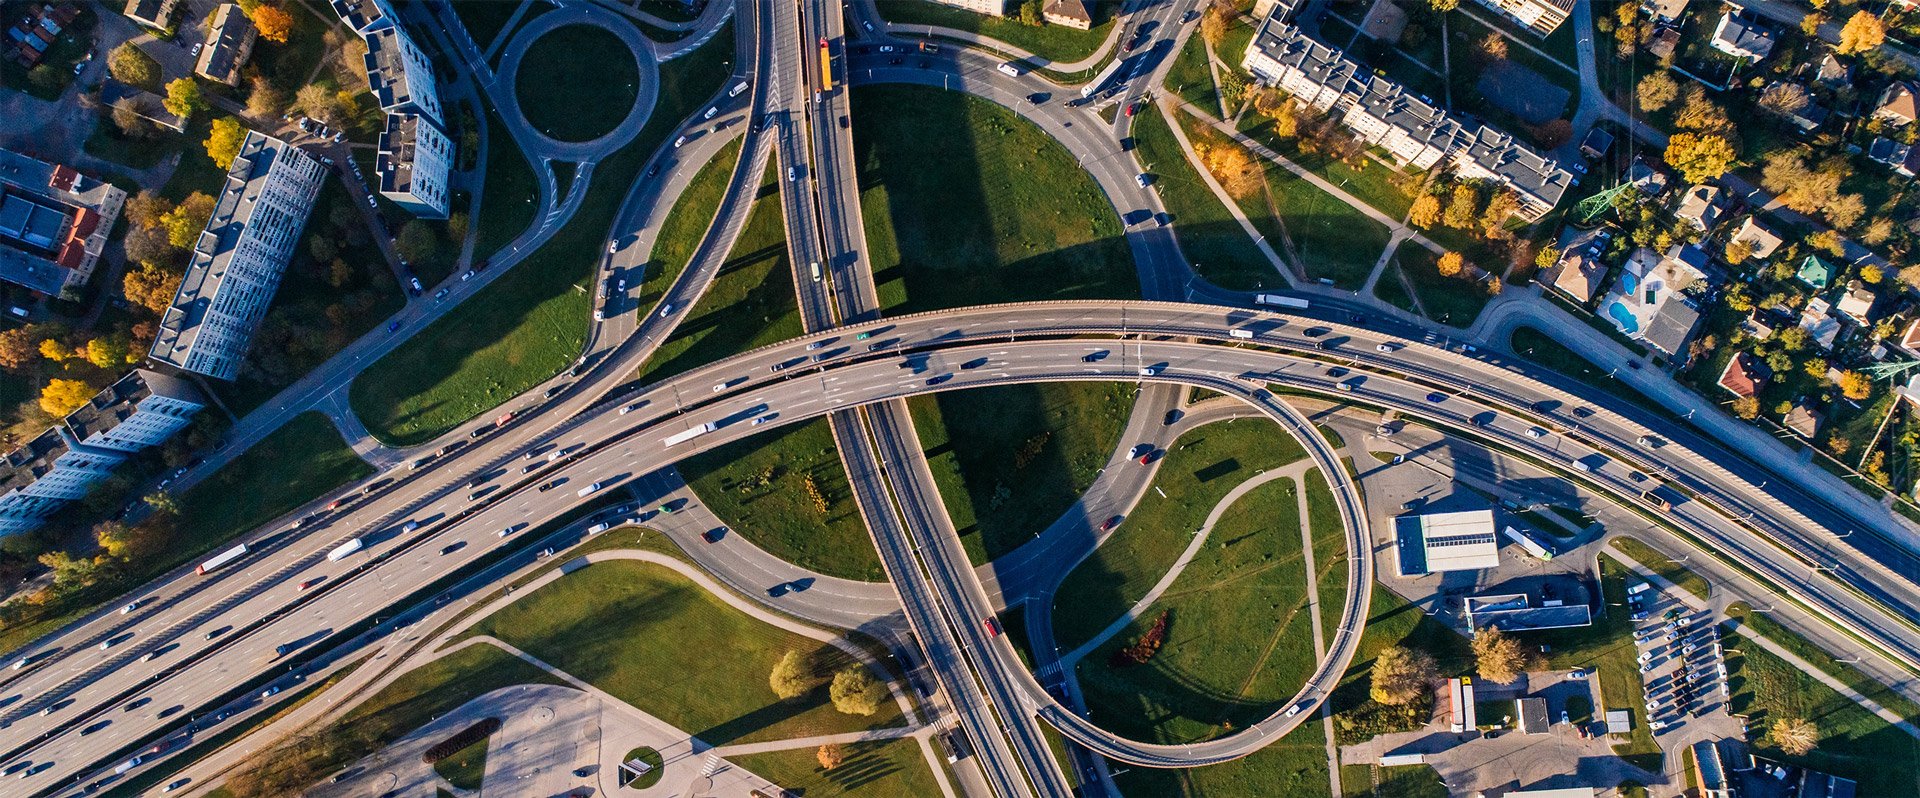 cloverleaf-interchange-aerial-view-accidents-risk-of-vicarious-liability